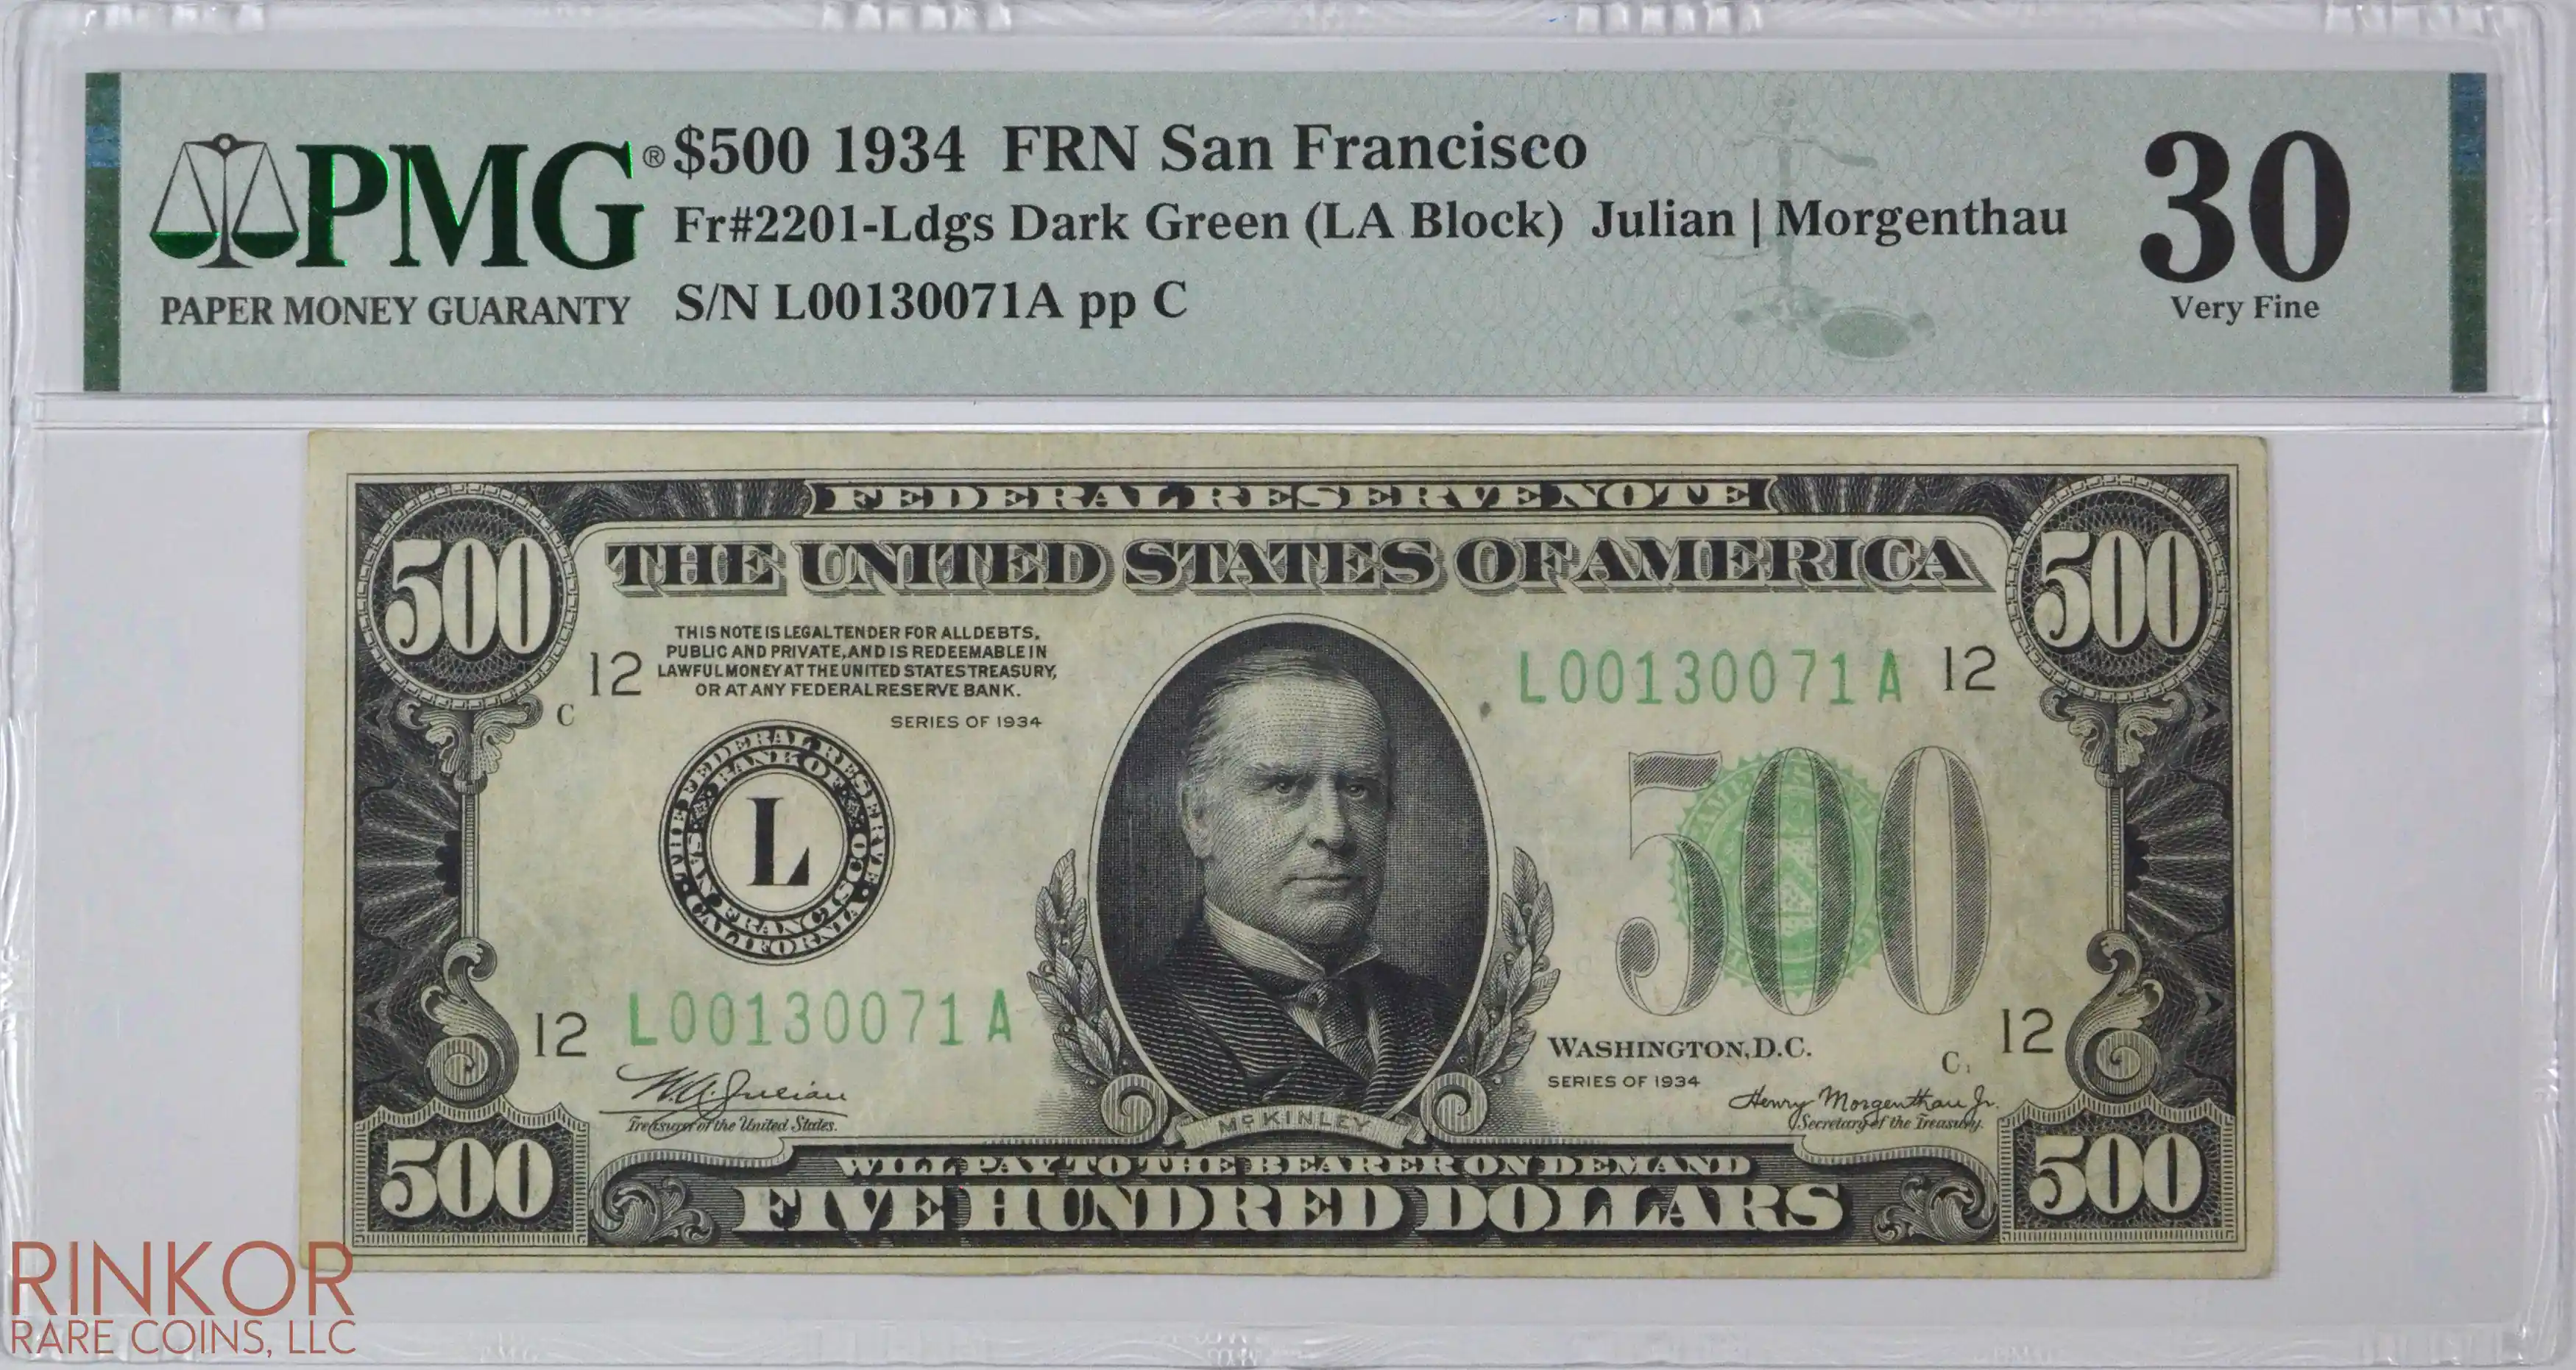 1934 $500 Fr. 2201-Ldgs San Francisco Federal Reserve Note PMG VF-30